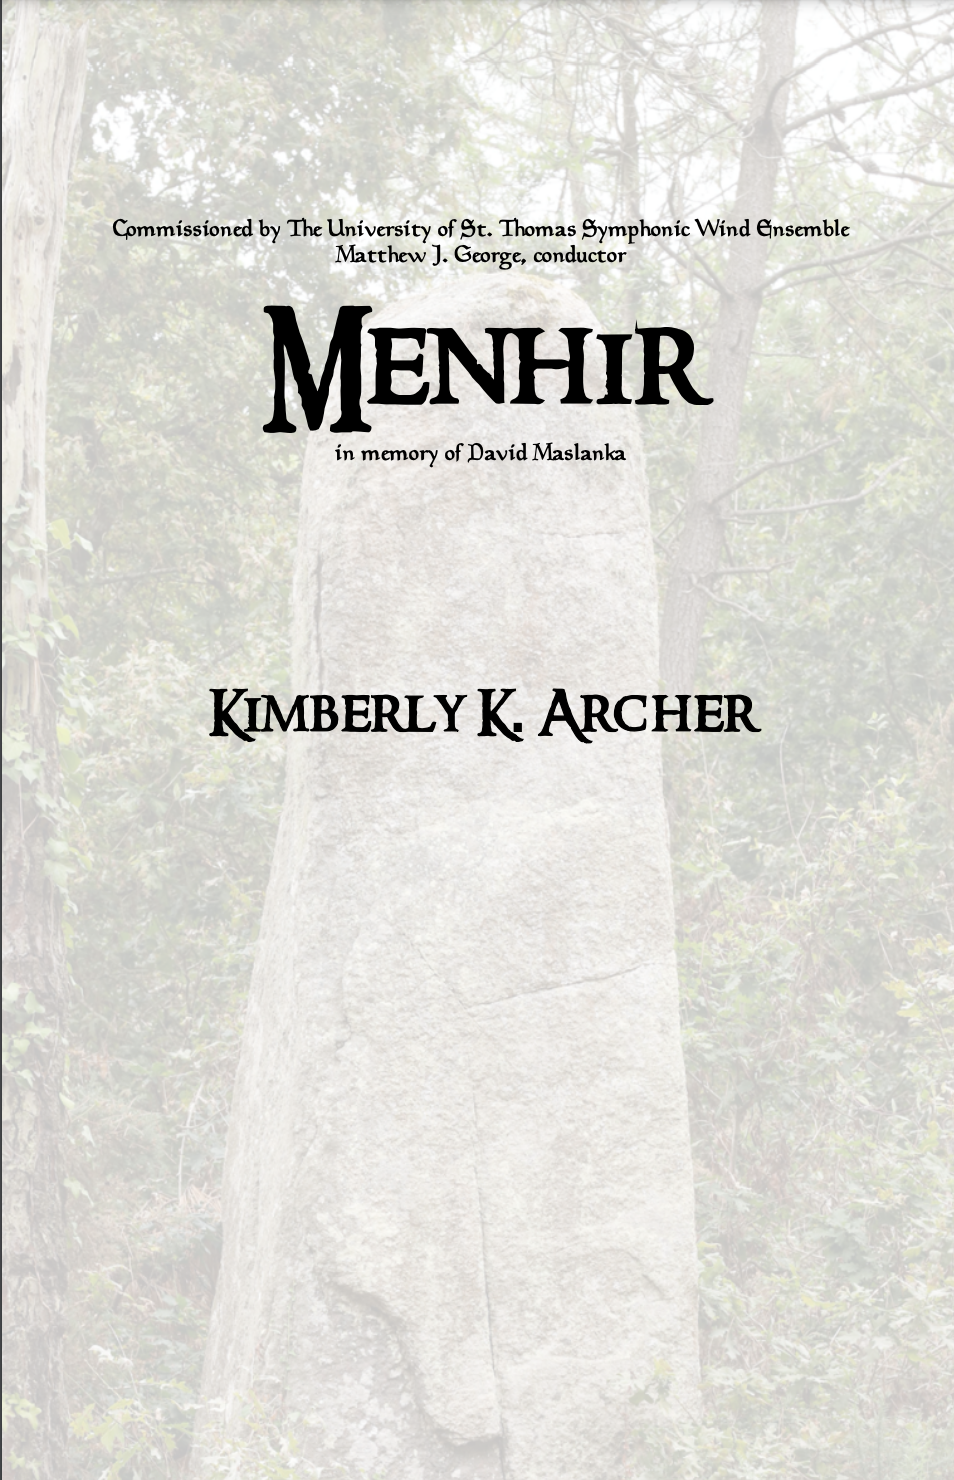 Menhir (Score Only) by Kimberly Archer